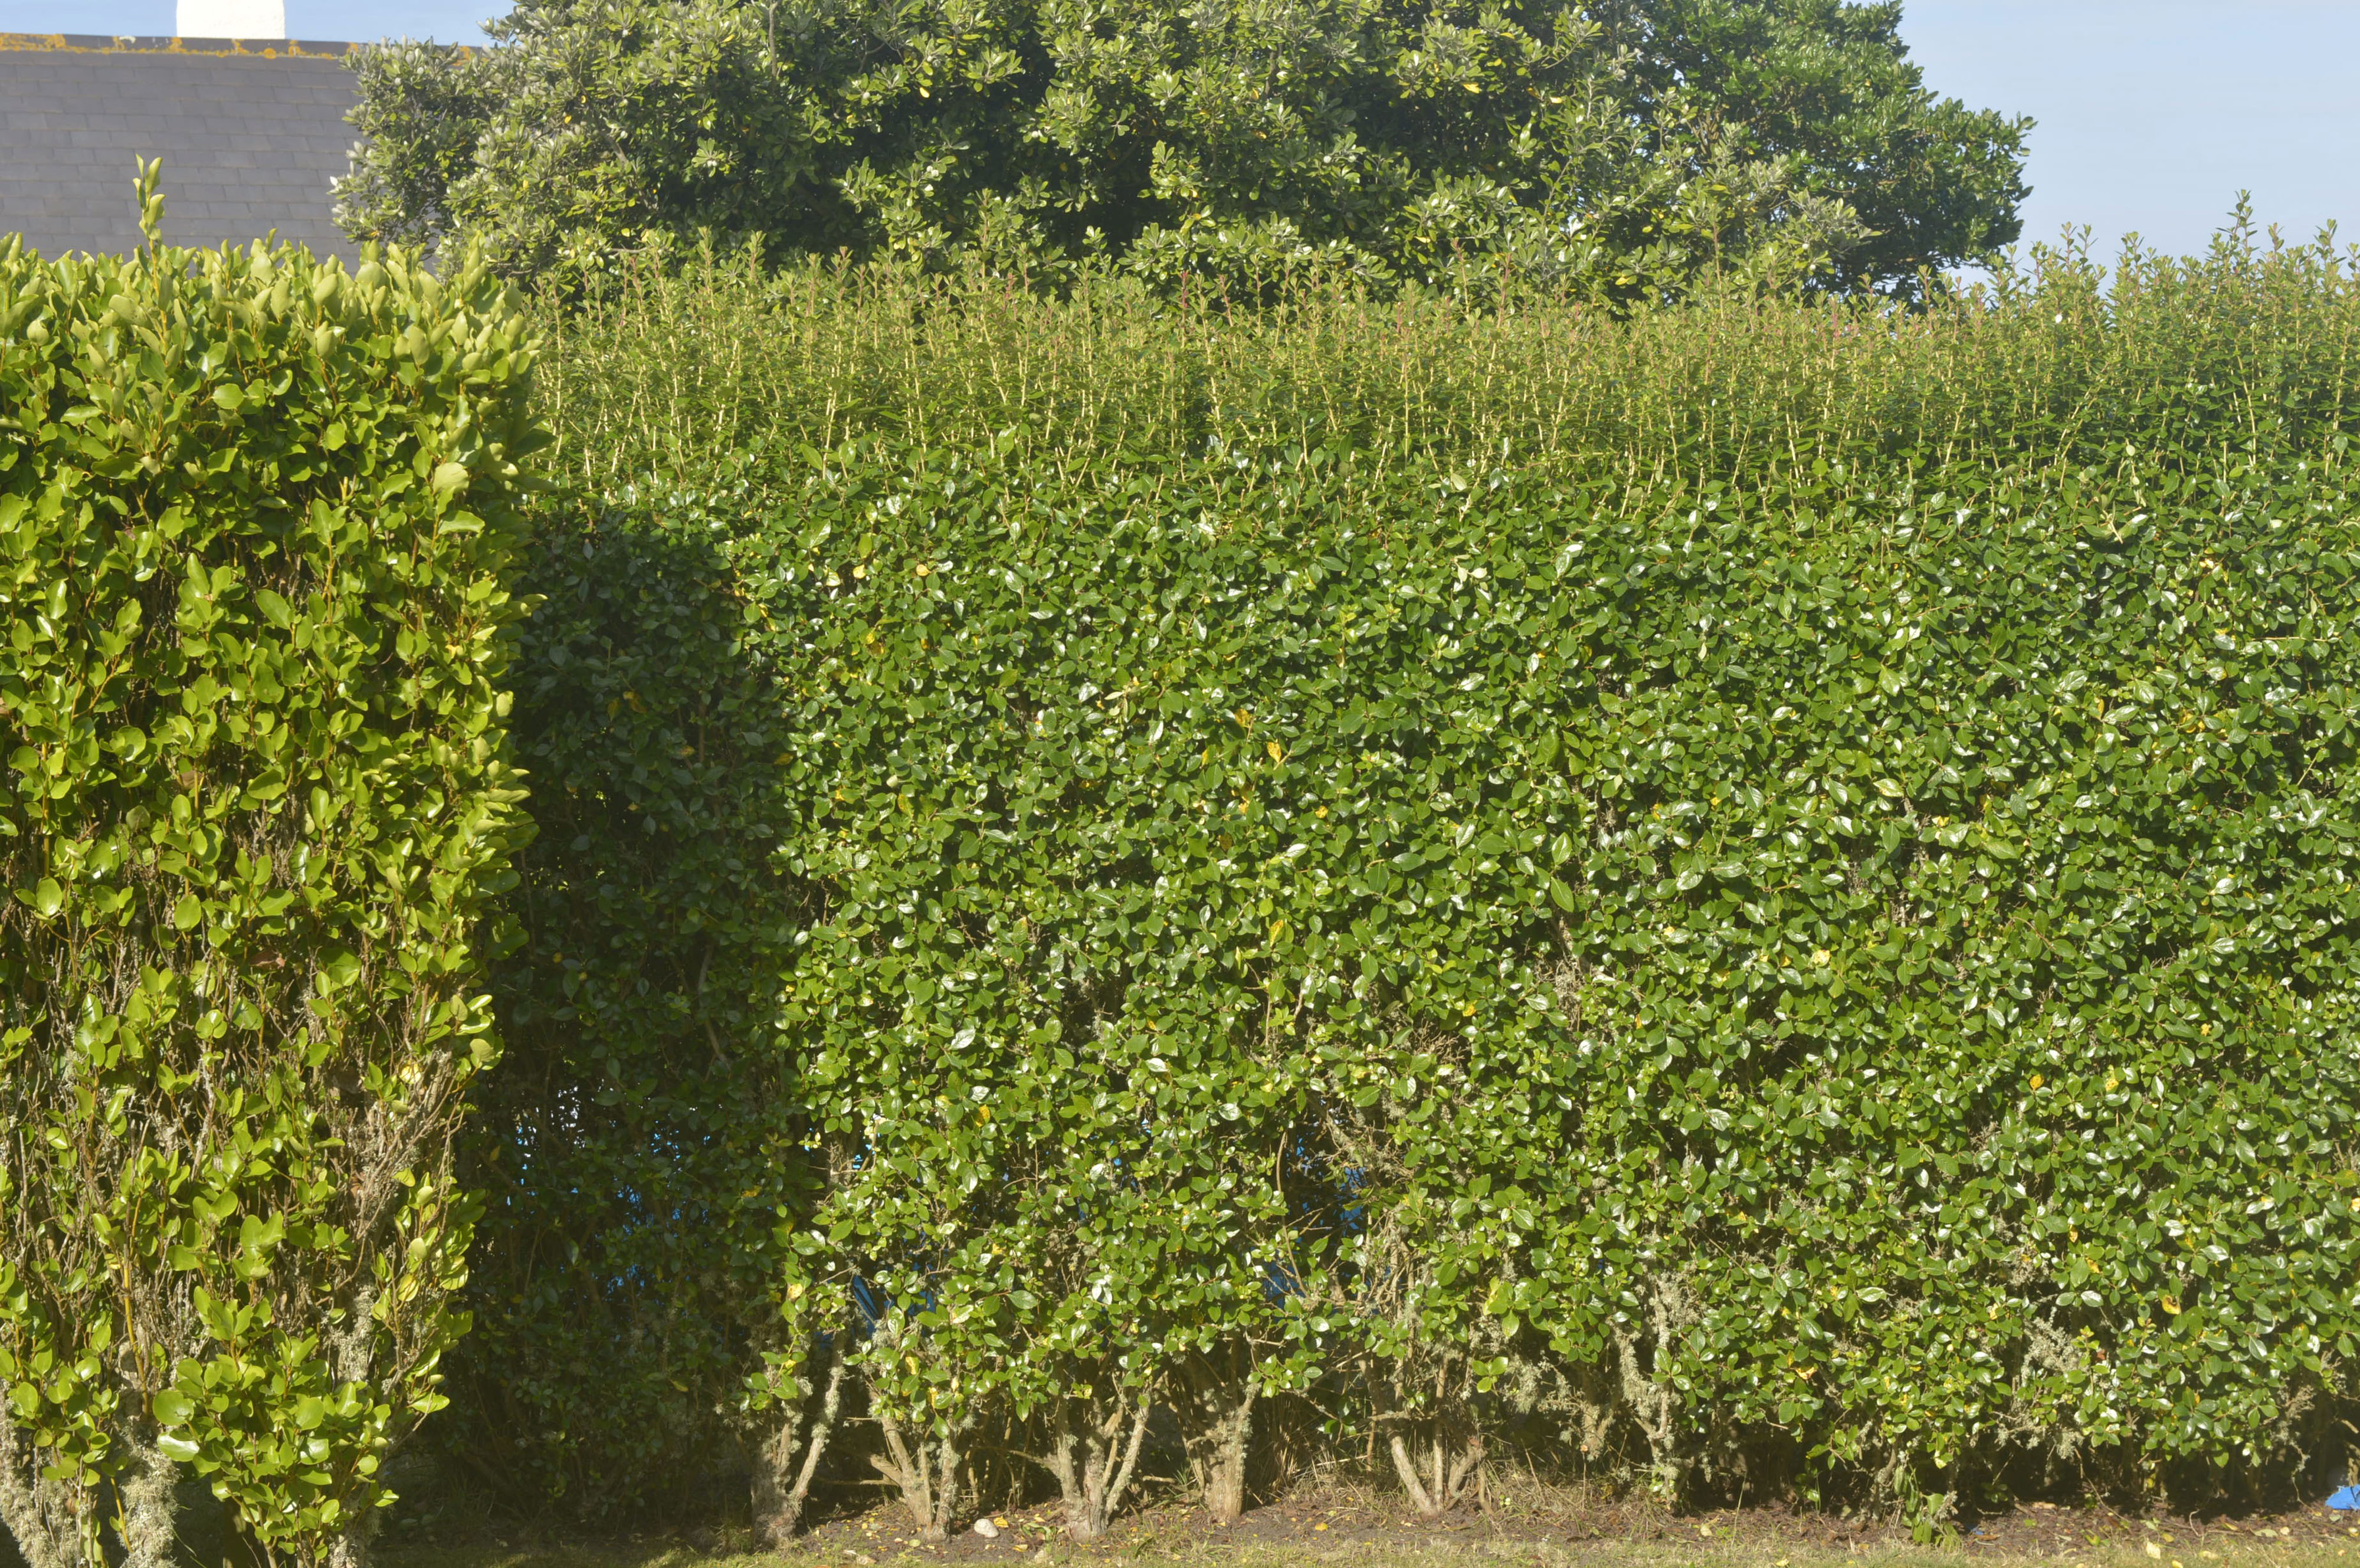 Use hedging to provide a natural screen. (Ben Birchall/PA)